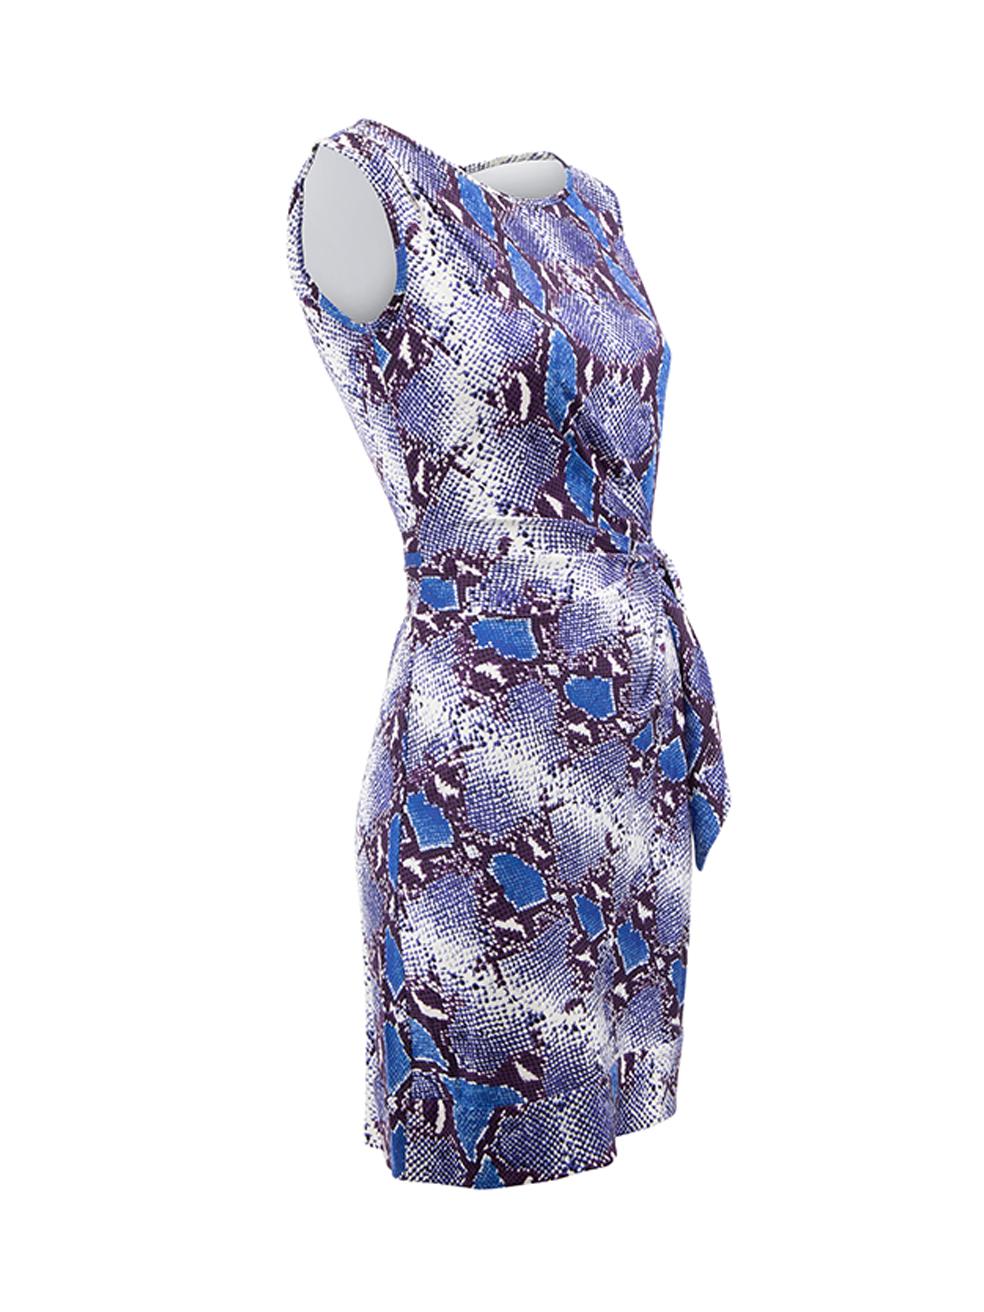 CONDITION is Very good. Hardly any visible wear to dress is evident on this used Diane Von Furstenberg designer resale item. 



Details


Blue

Silk

Mini dress

Snakeskin pattern

Round neckline

Tie waisted ruched design





Made in